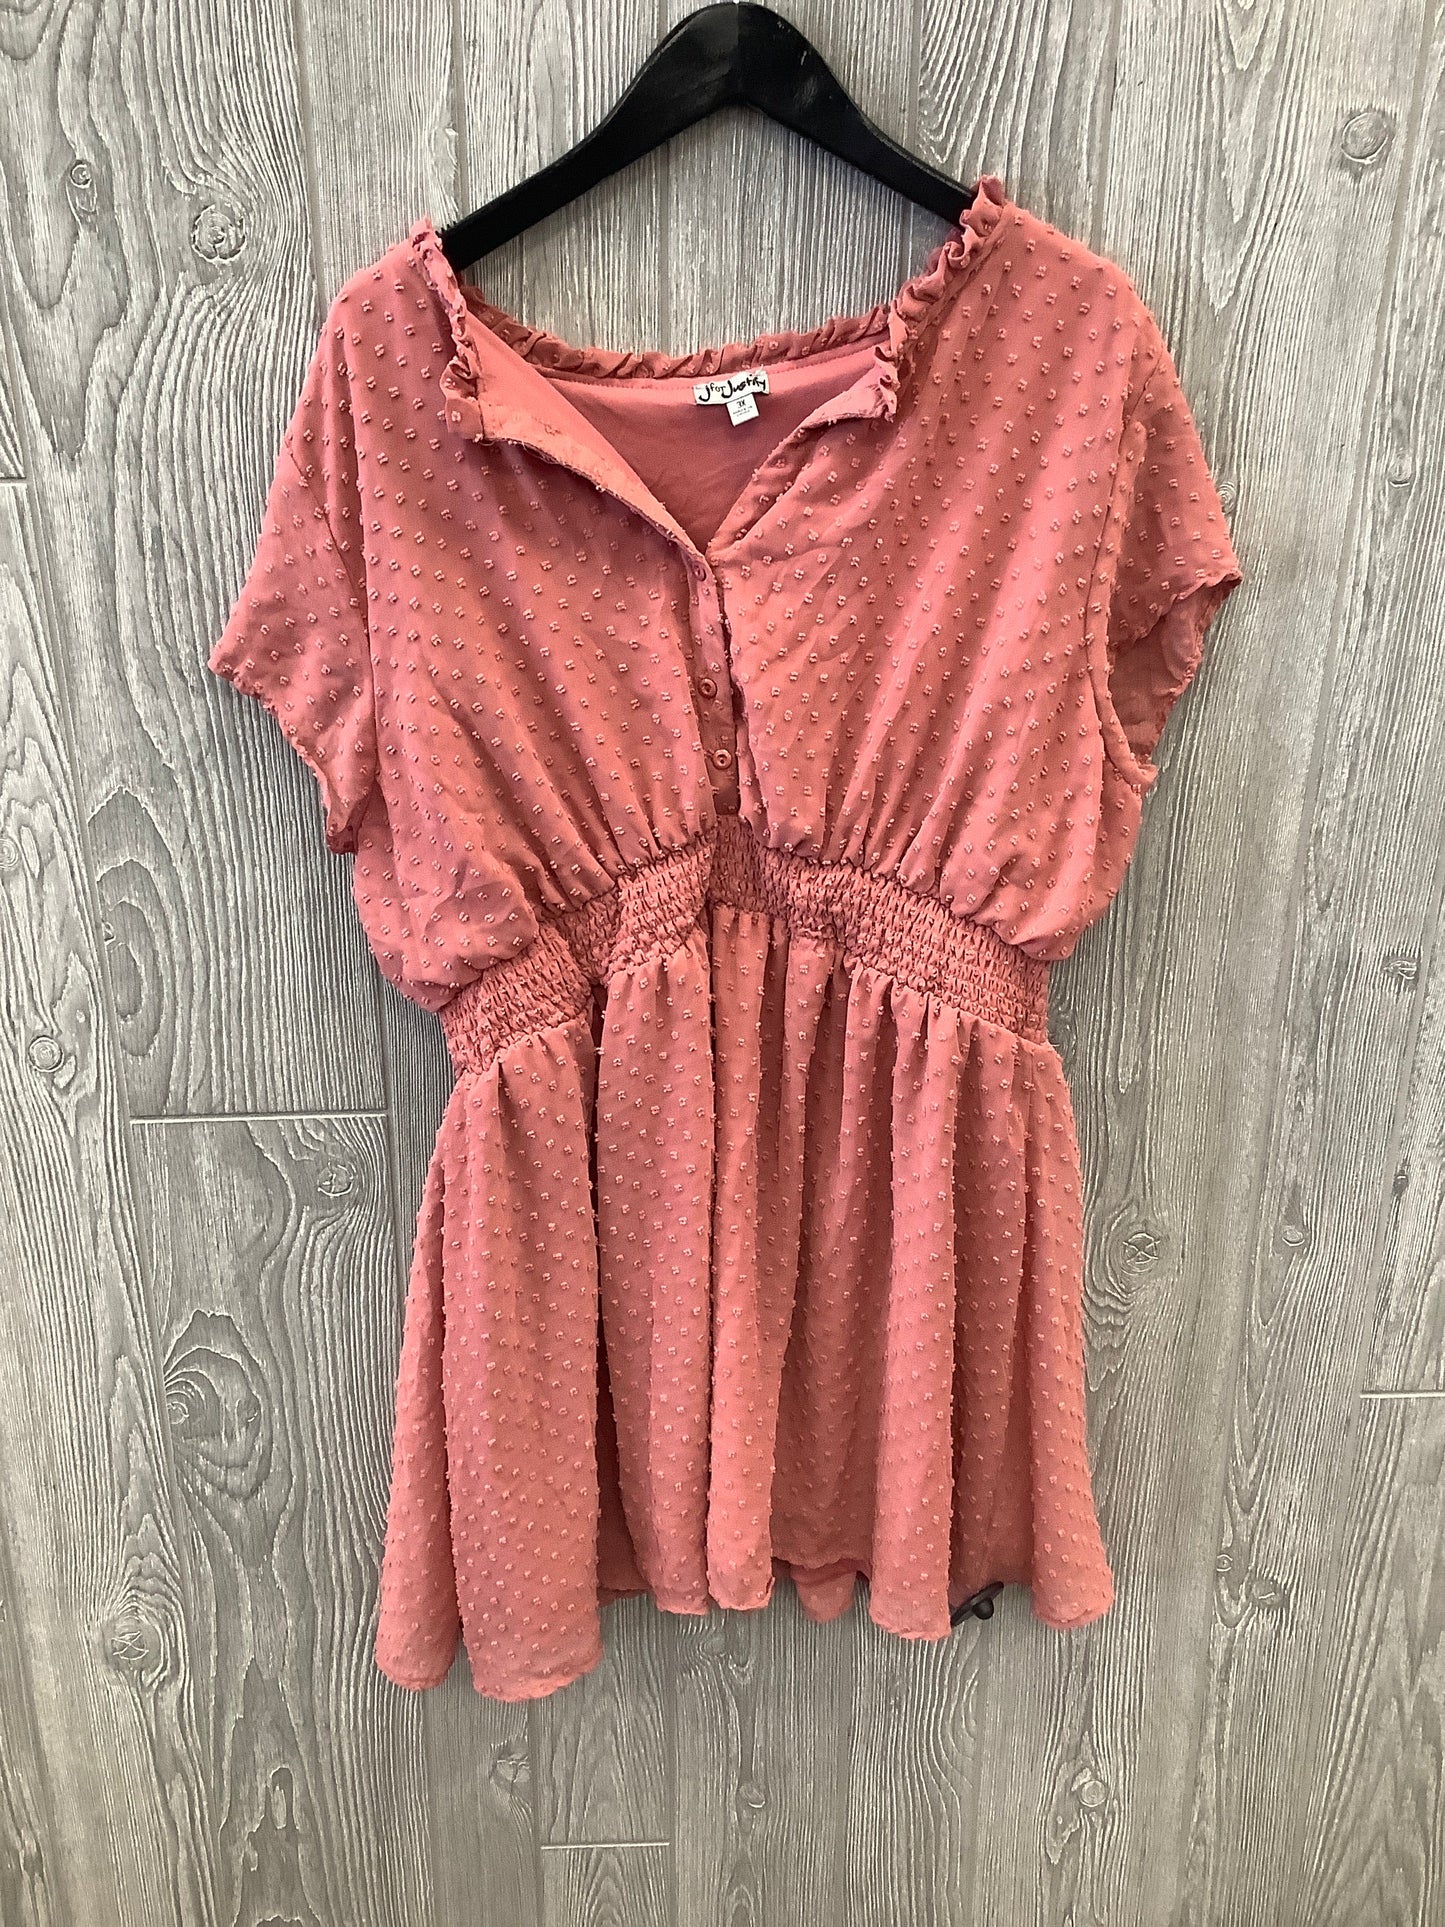 Pink Top Short Sleeve J For Justify, Size 3x